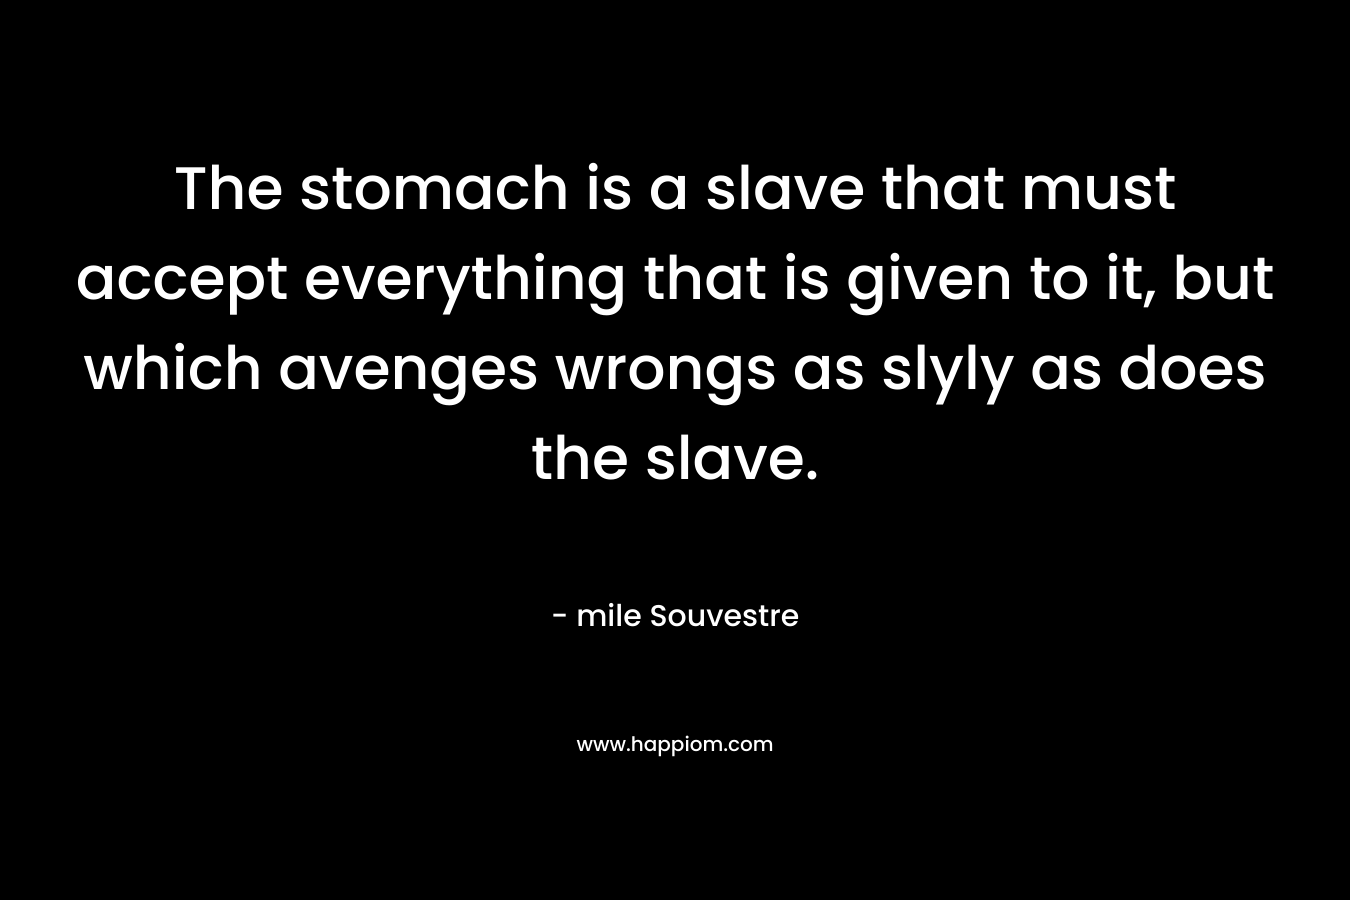 The stomach is a slave that must accept everything that is given to it, but which avenges wrongs as slyly as does the slave.